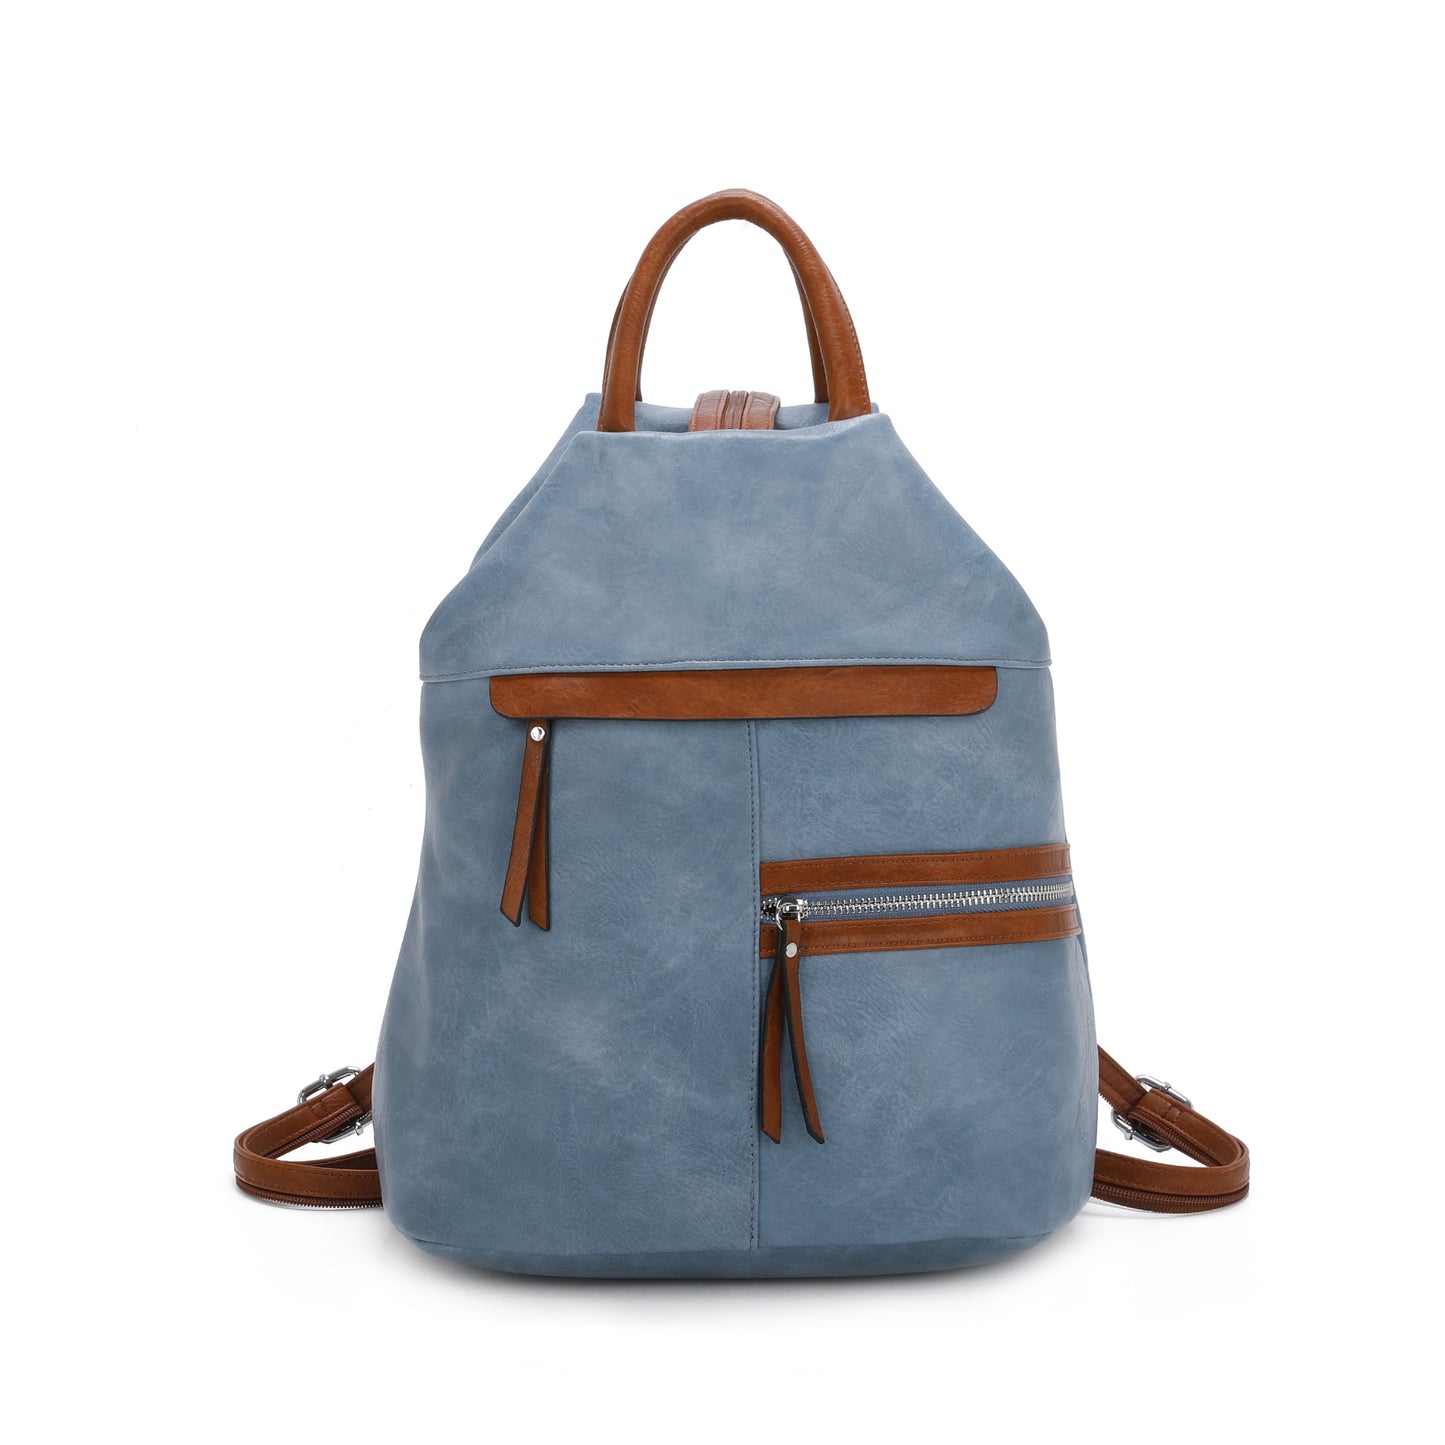 Synthetic leather backpack